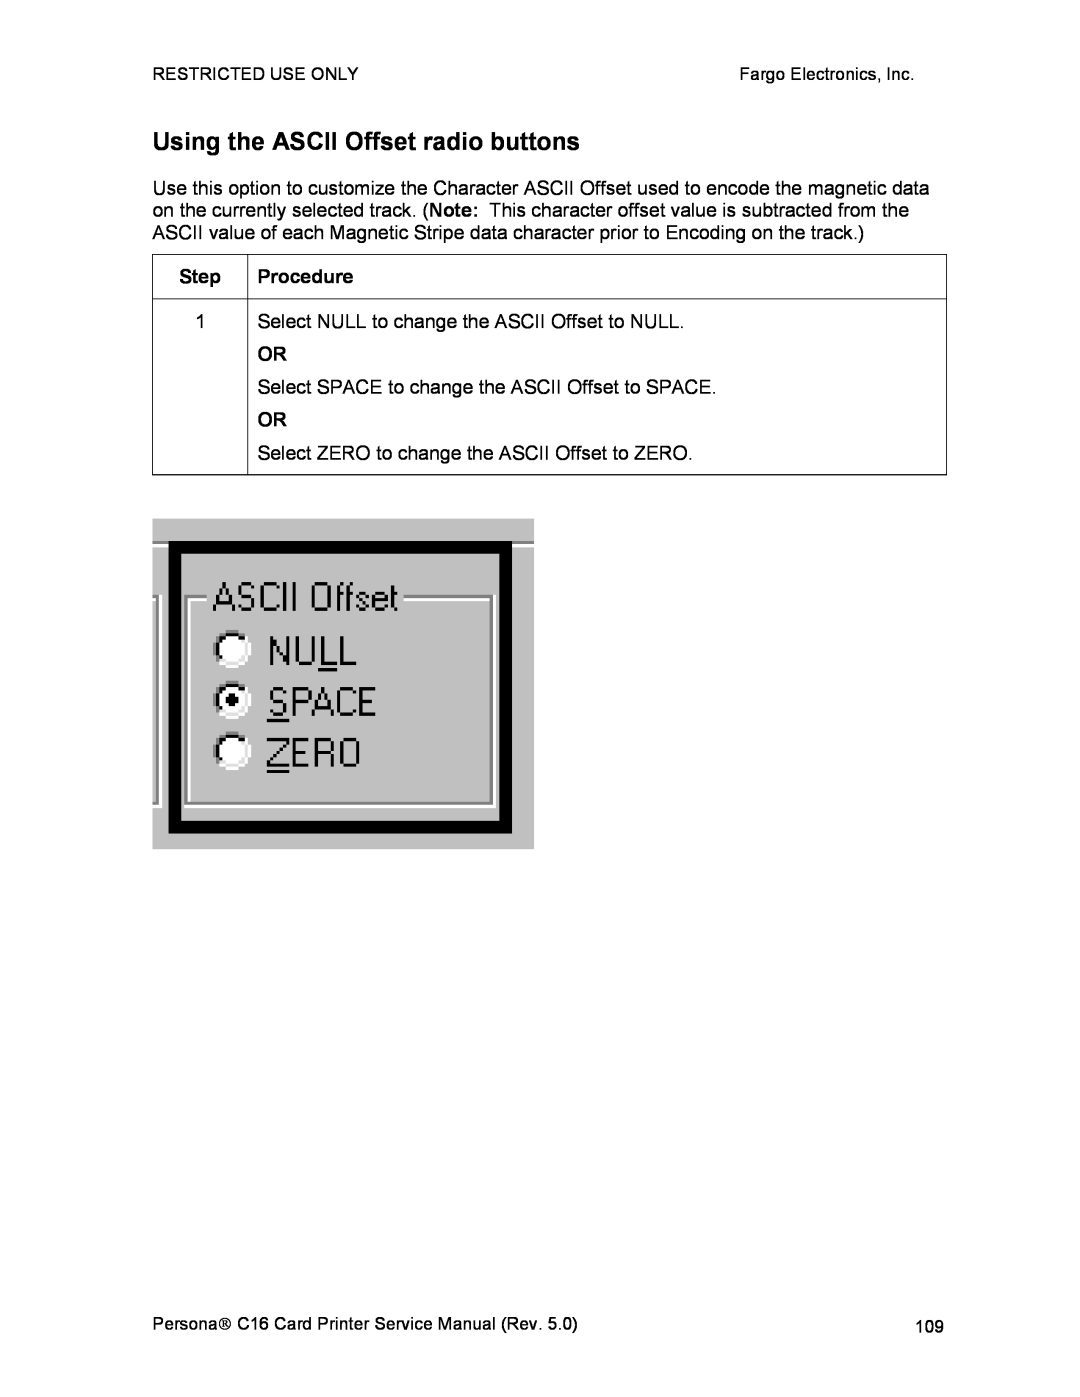 FARGO electronic C16 service manual Using the ASCII Offset radio buttons 